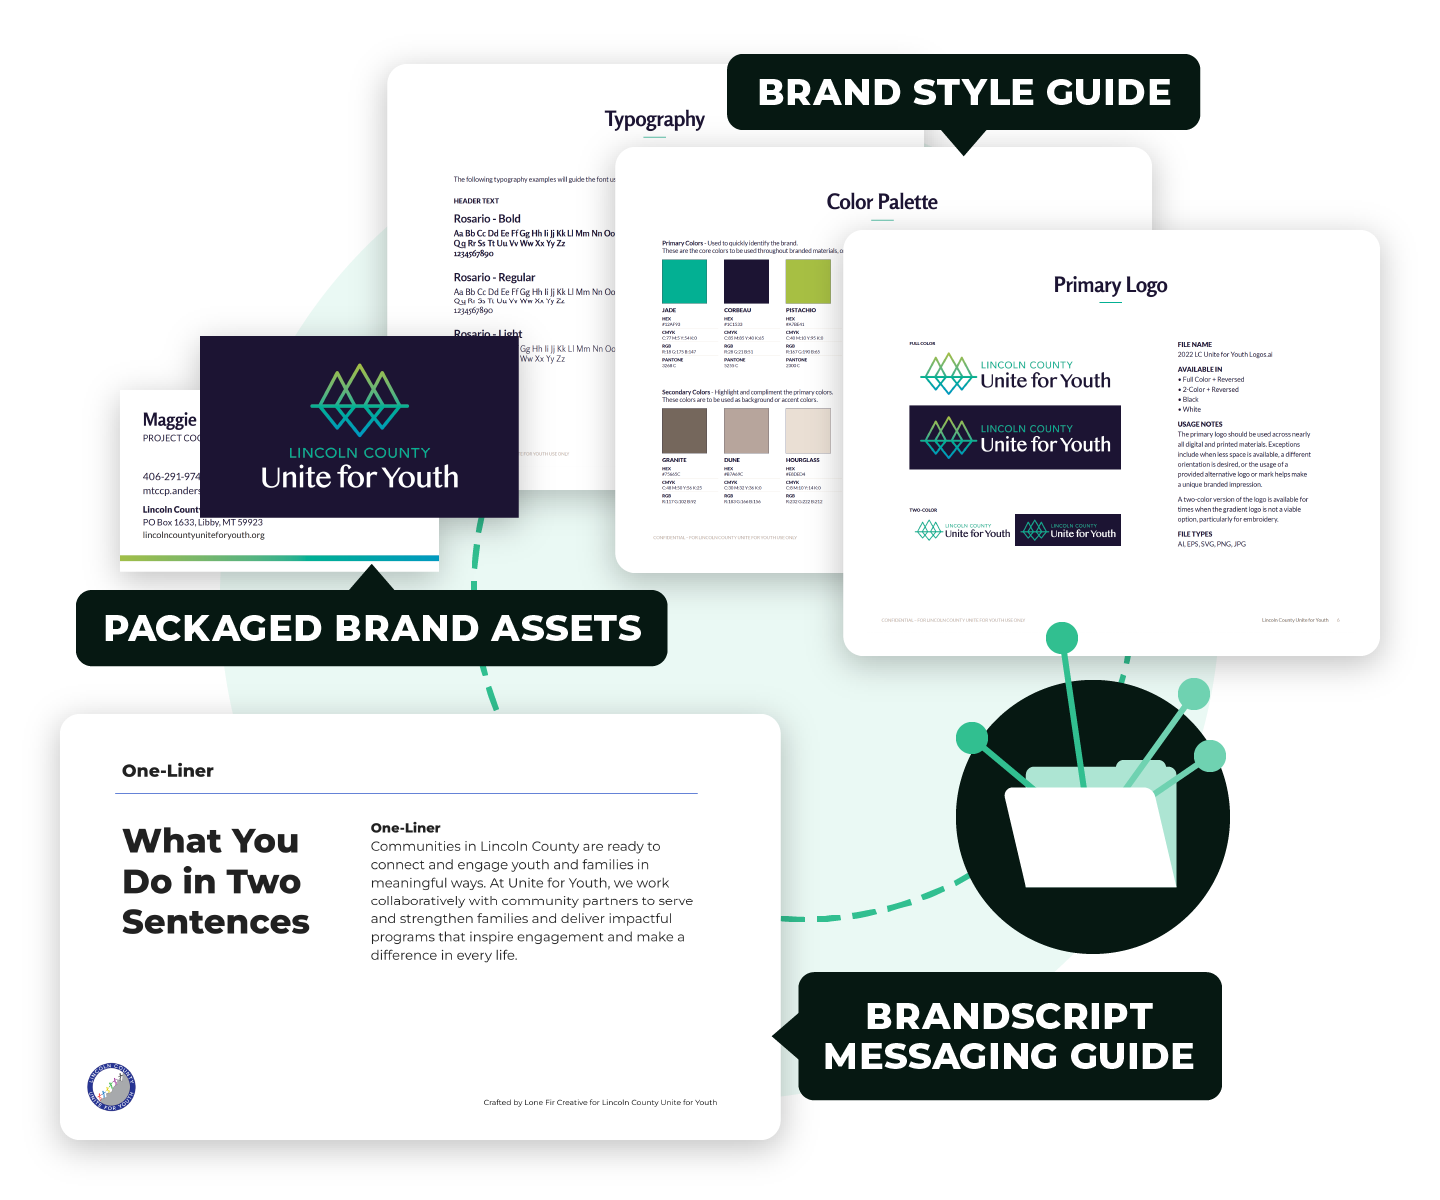 Illustration Showing Examples of Our Visual Brand Style and BrandScript Messaging Guidelines